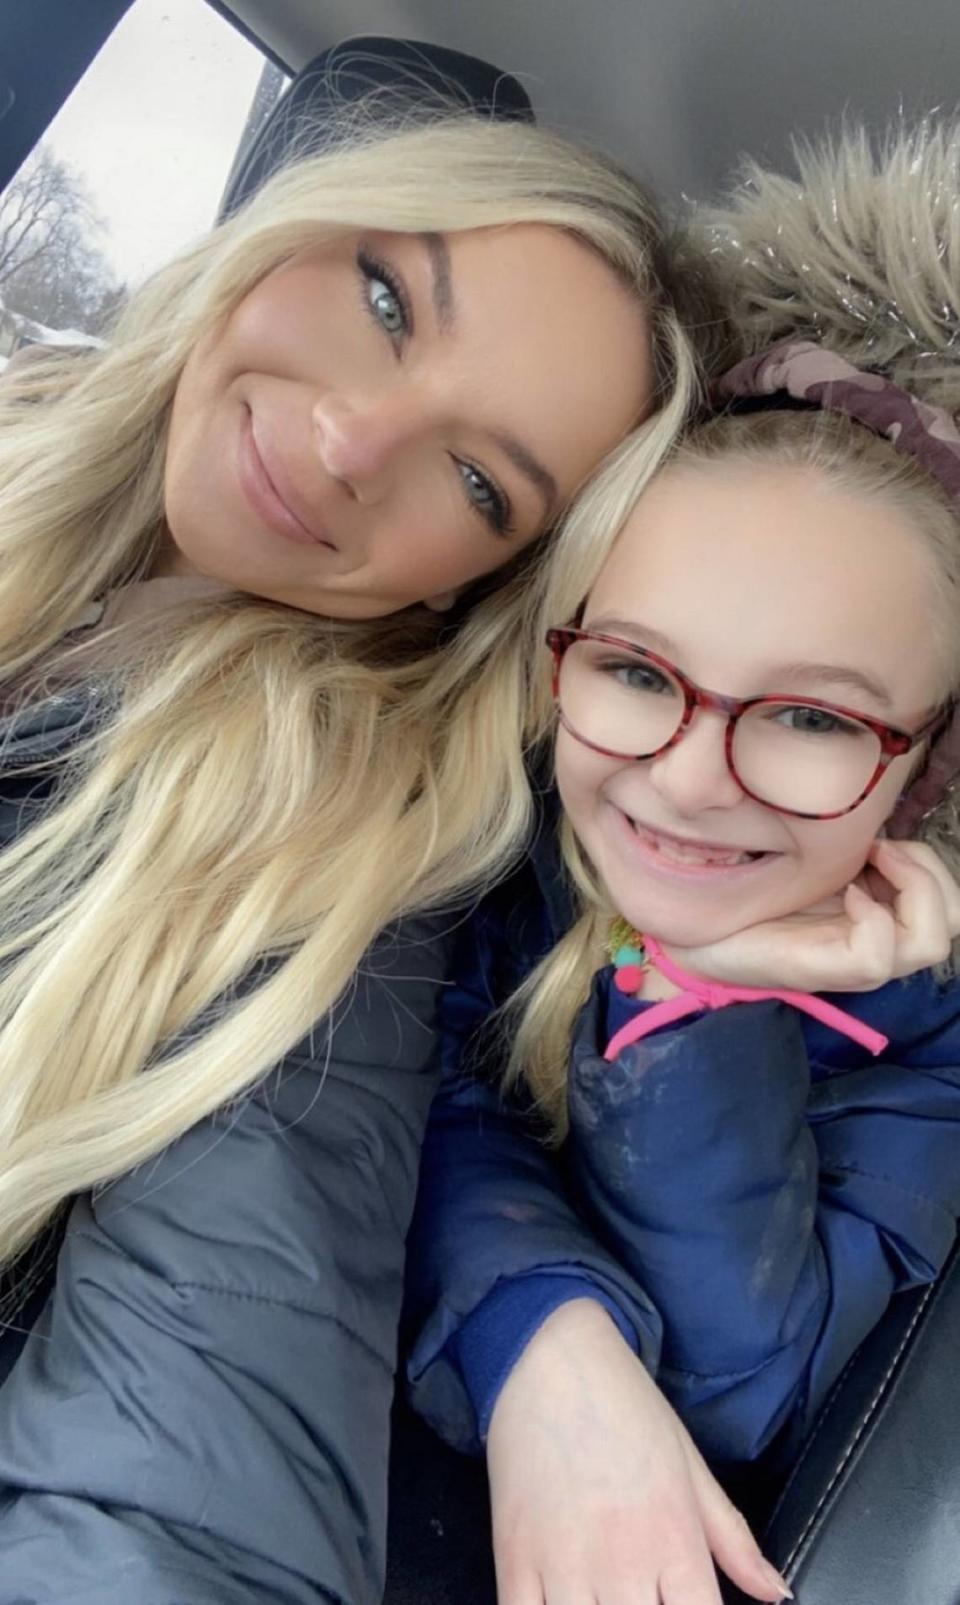 Chelsey Stetson and her daughter Bellamy. Chelsey, a cast member of the TV reality series “Welcome to Myrtle Manor,” now lives in Ohio. Courtesy/Courtesy